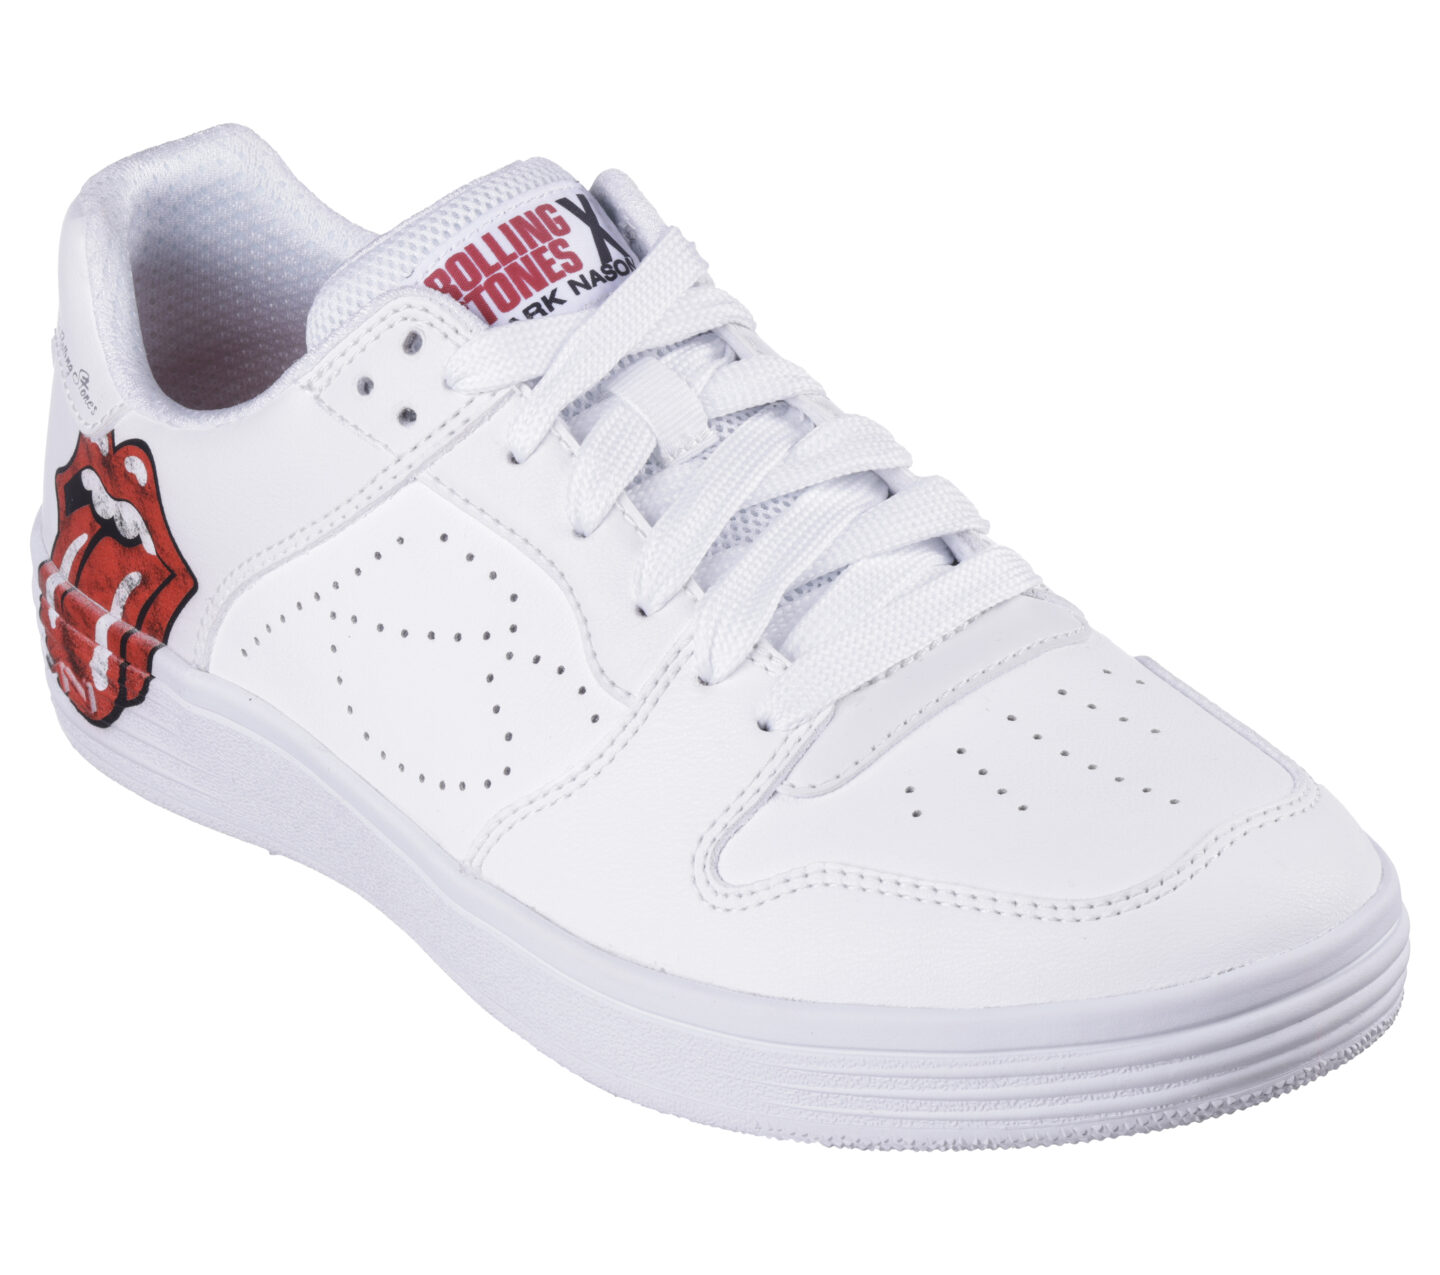 SKECHERS X THE ROLLING STONES: PALMILLA – RS MARQUEE 210748 WHT